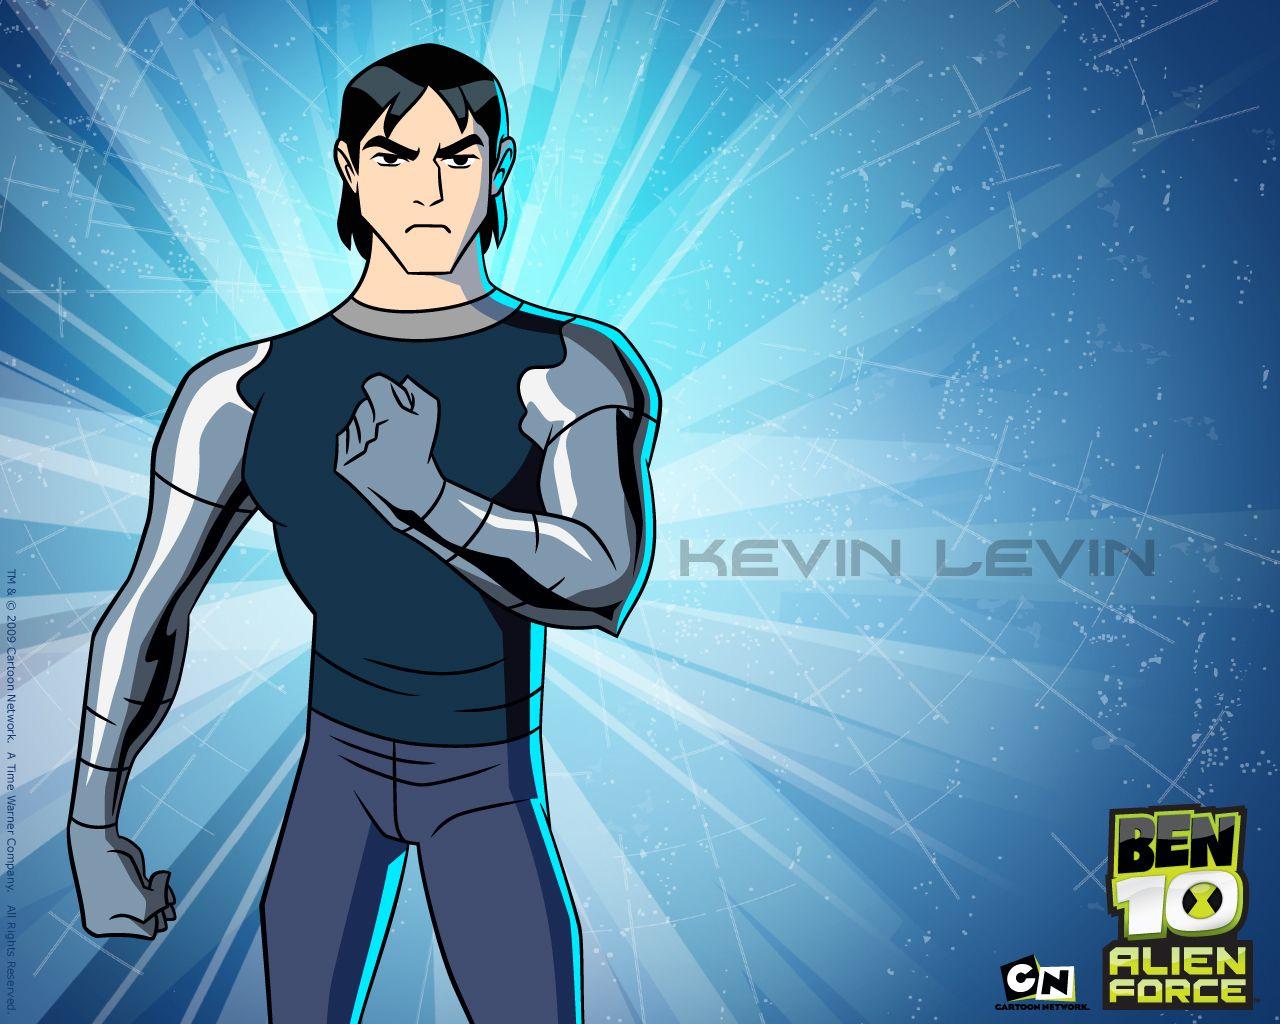 Ben 10:ALIEN FORCE - kevin HD wallpaper and background